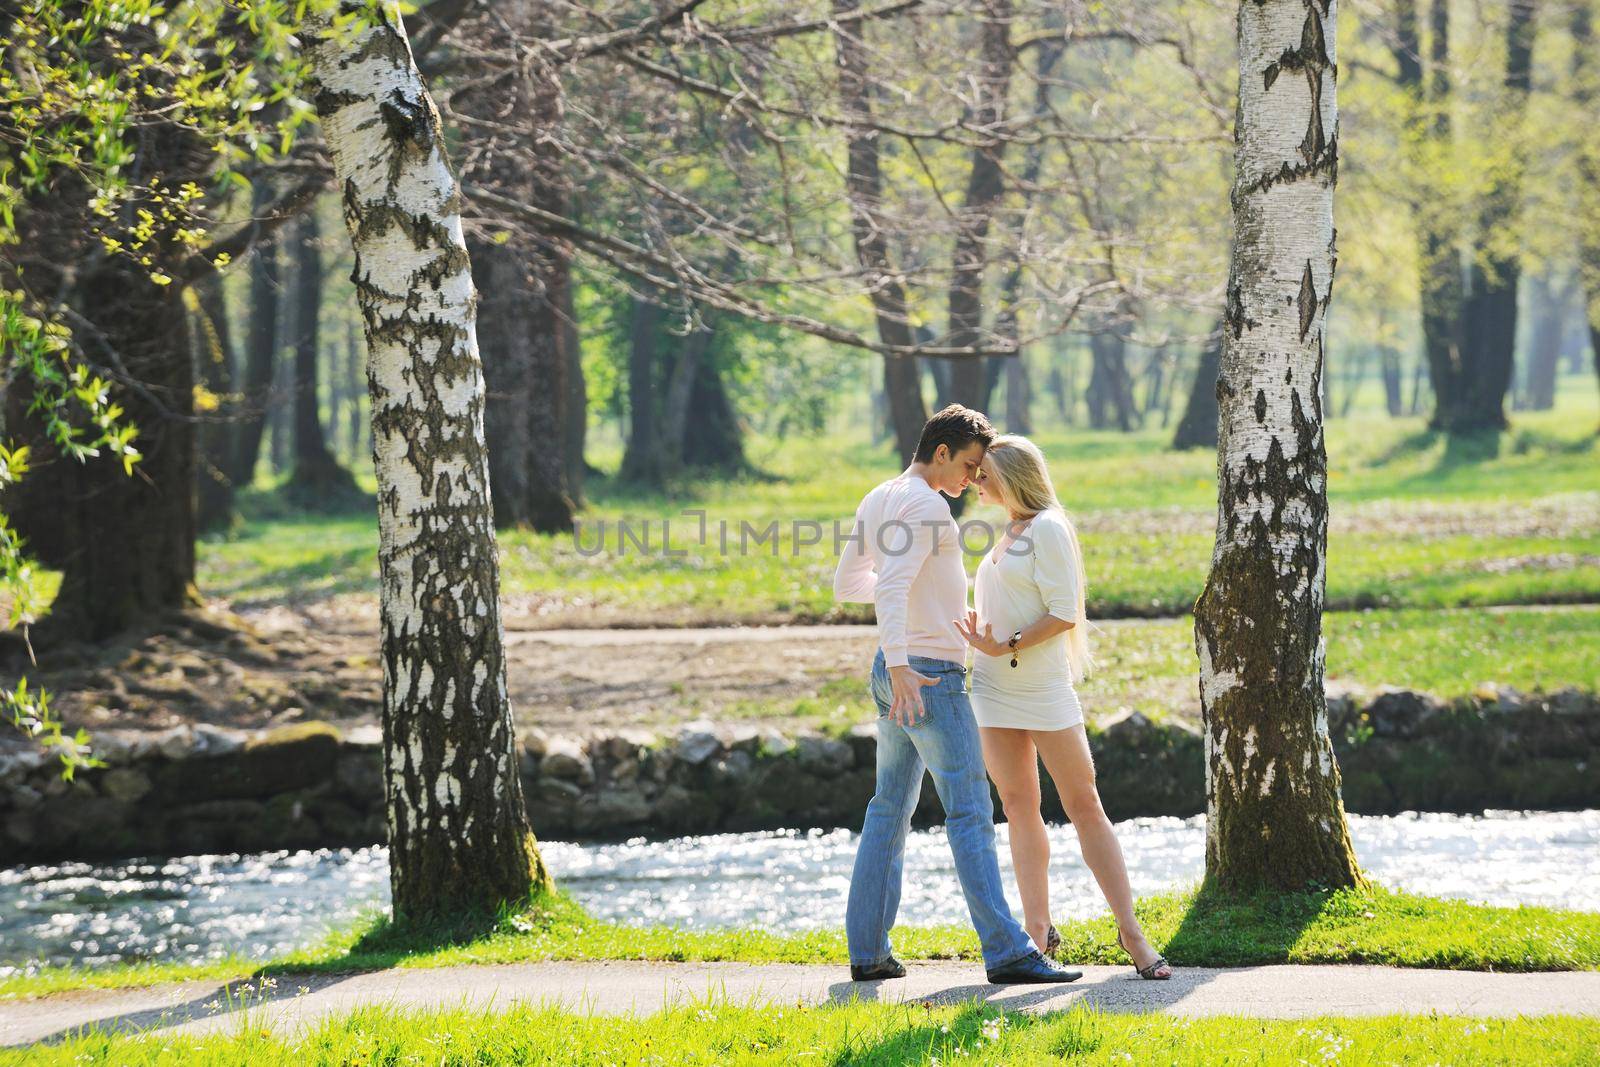 happy young romantic couple in love dance outdoor at spring season on early mornig with beautiful light